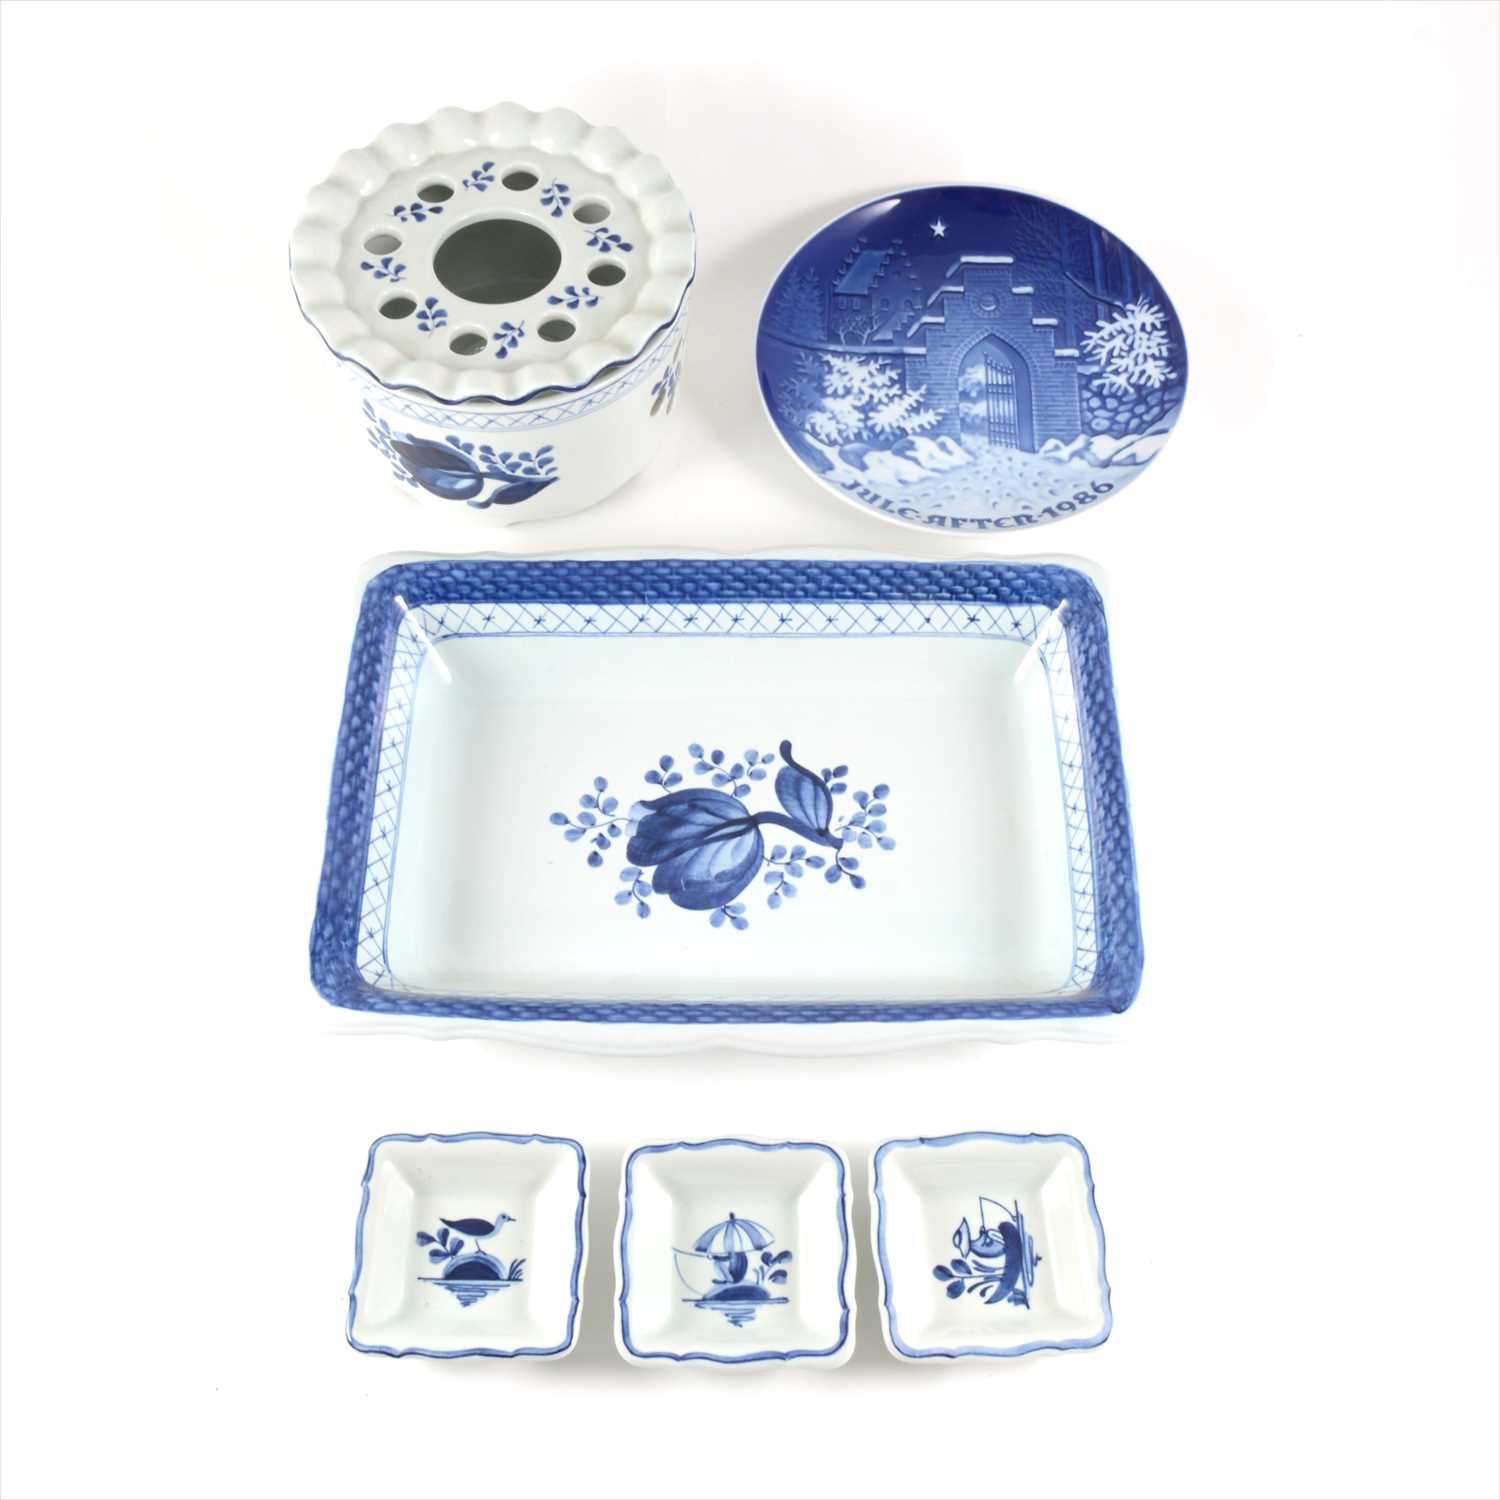 Lot 11 - Royal Copenhagen Fajence ware including dish, three small pickle dishes, pot-pourri dish, and a Christmas plate 1986.